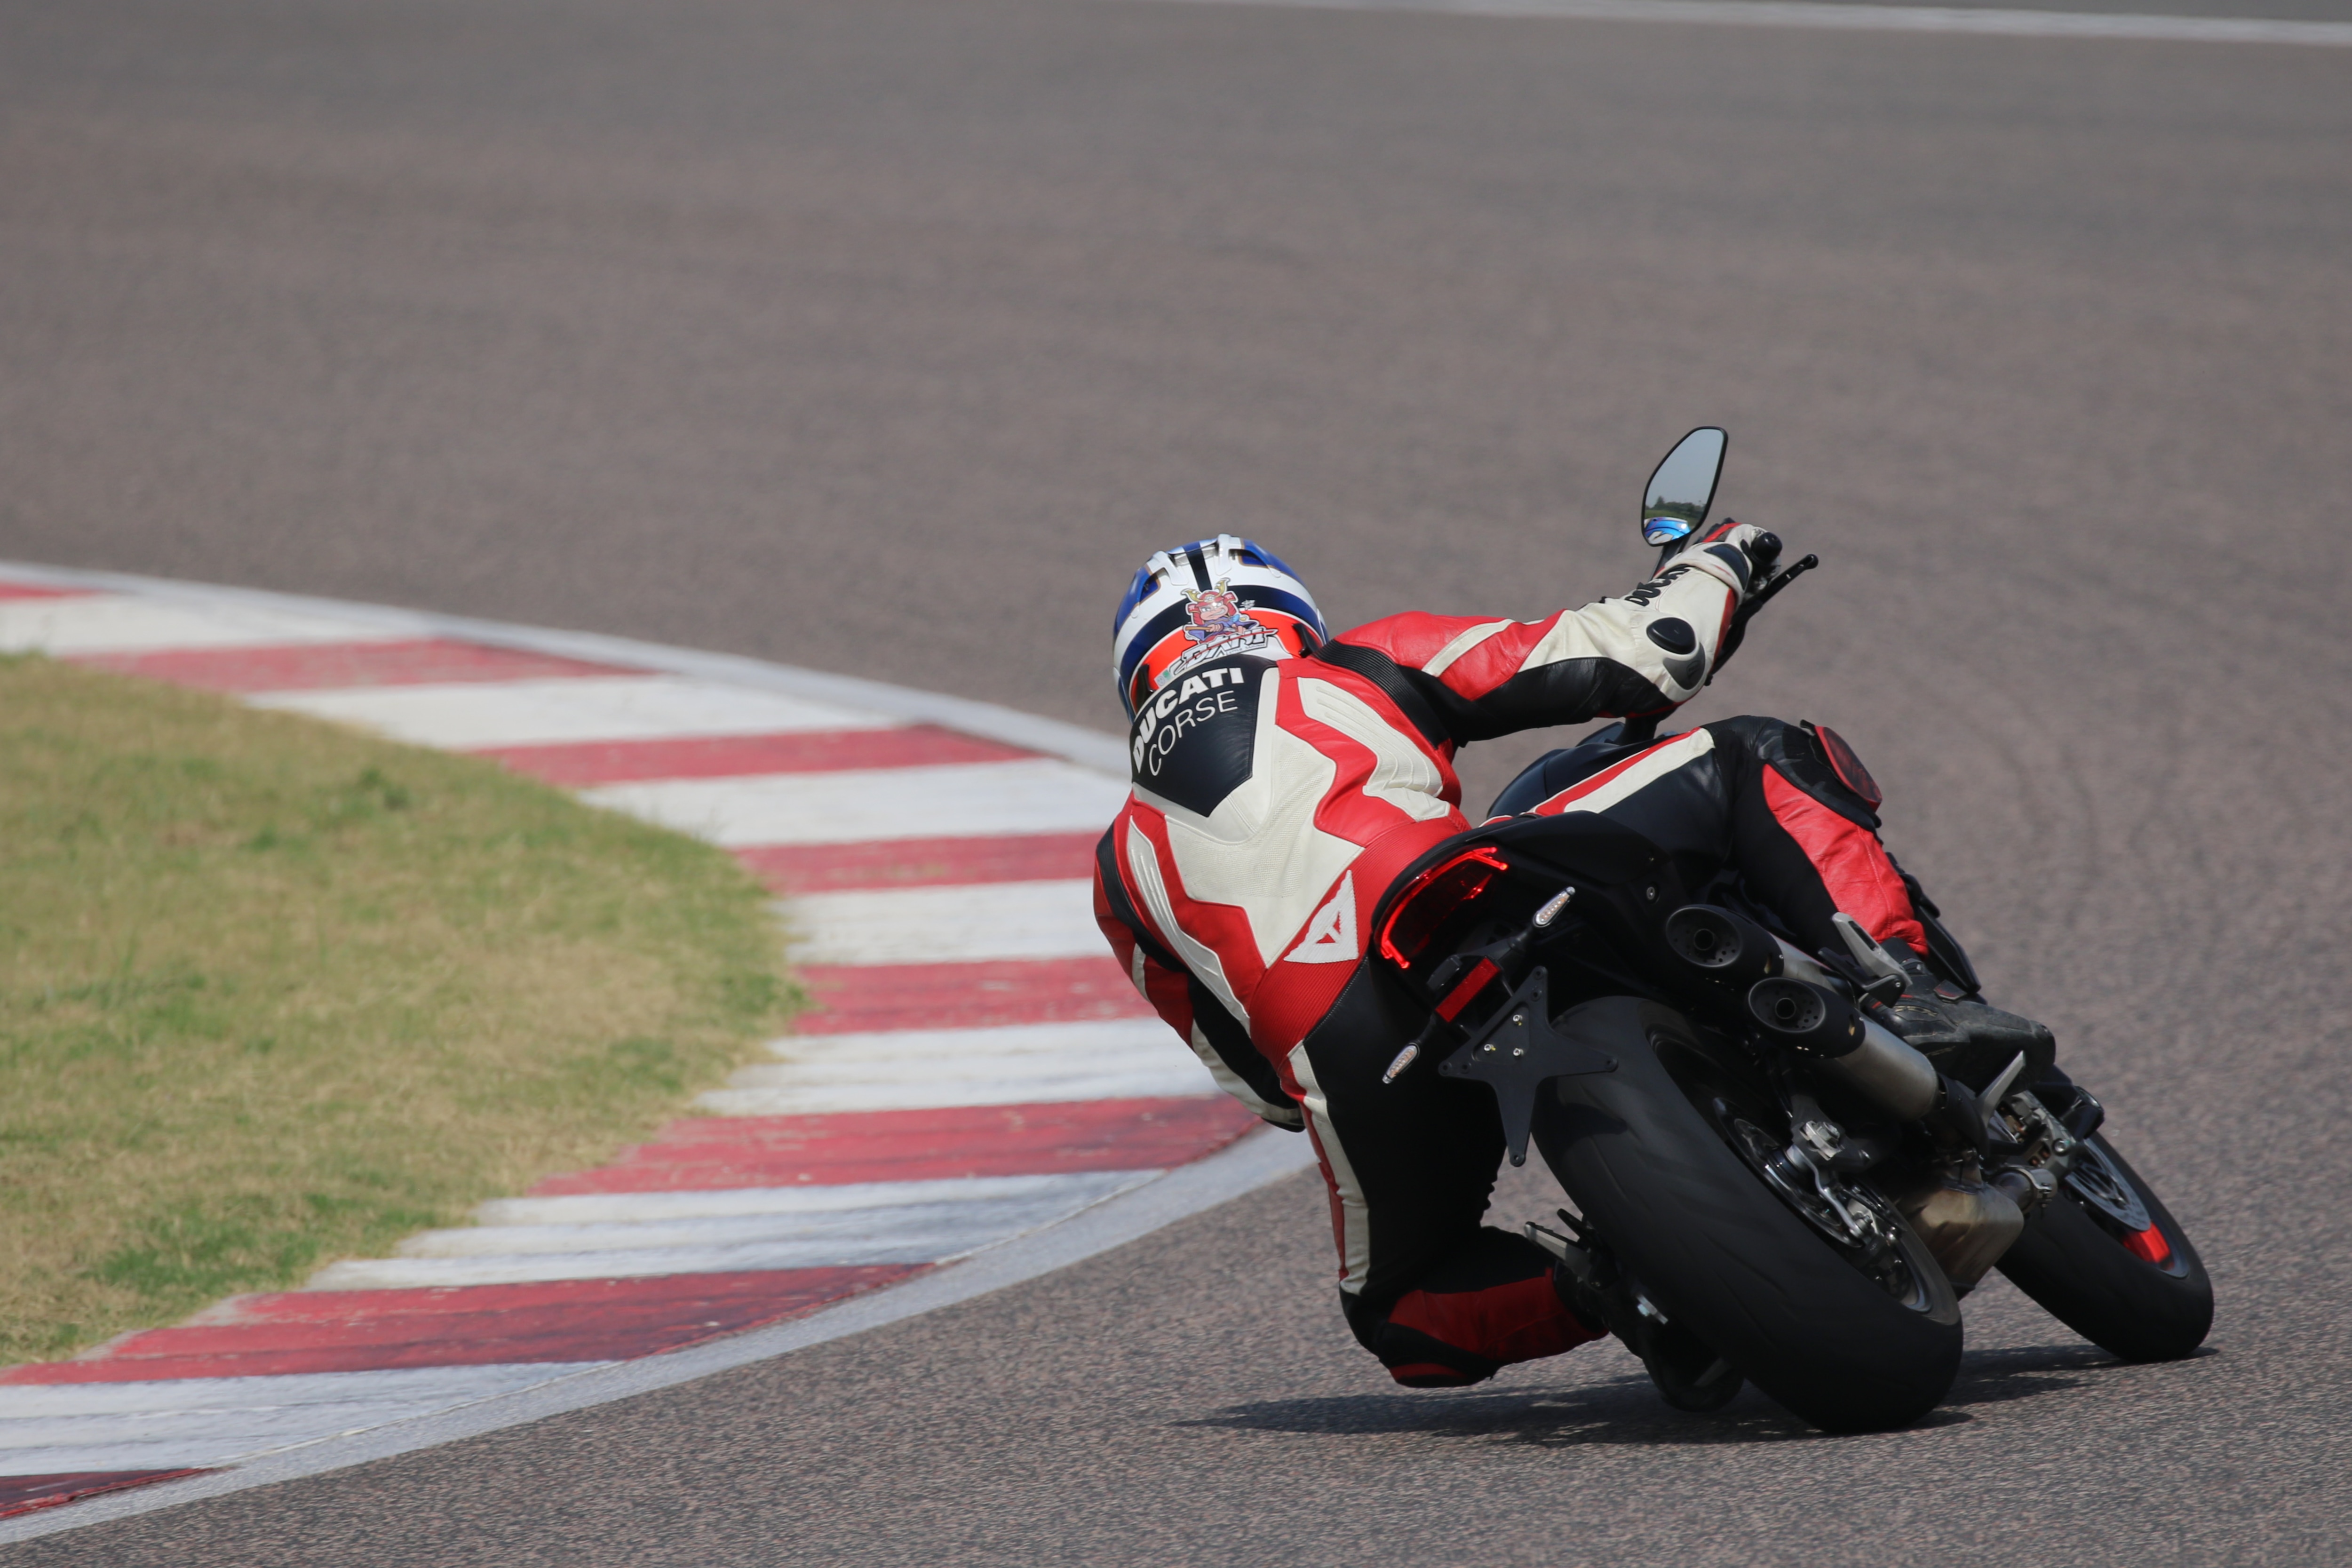 The grippy Pirelli Diablo Rosso III tires on the new Ducati Monster contribute to quicker transitions.